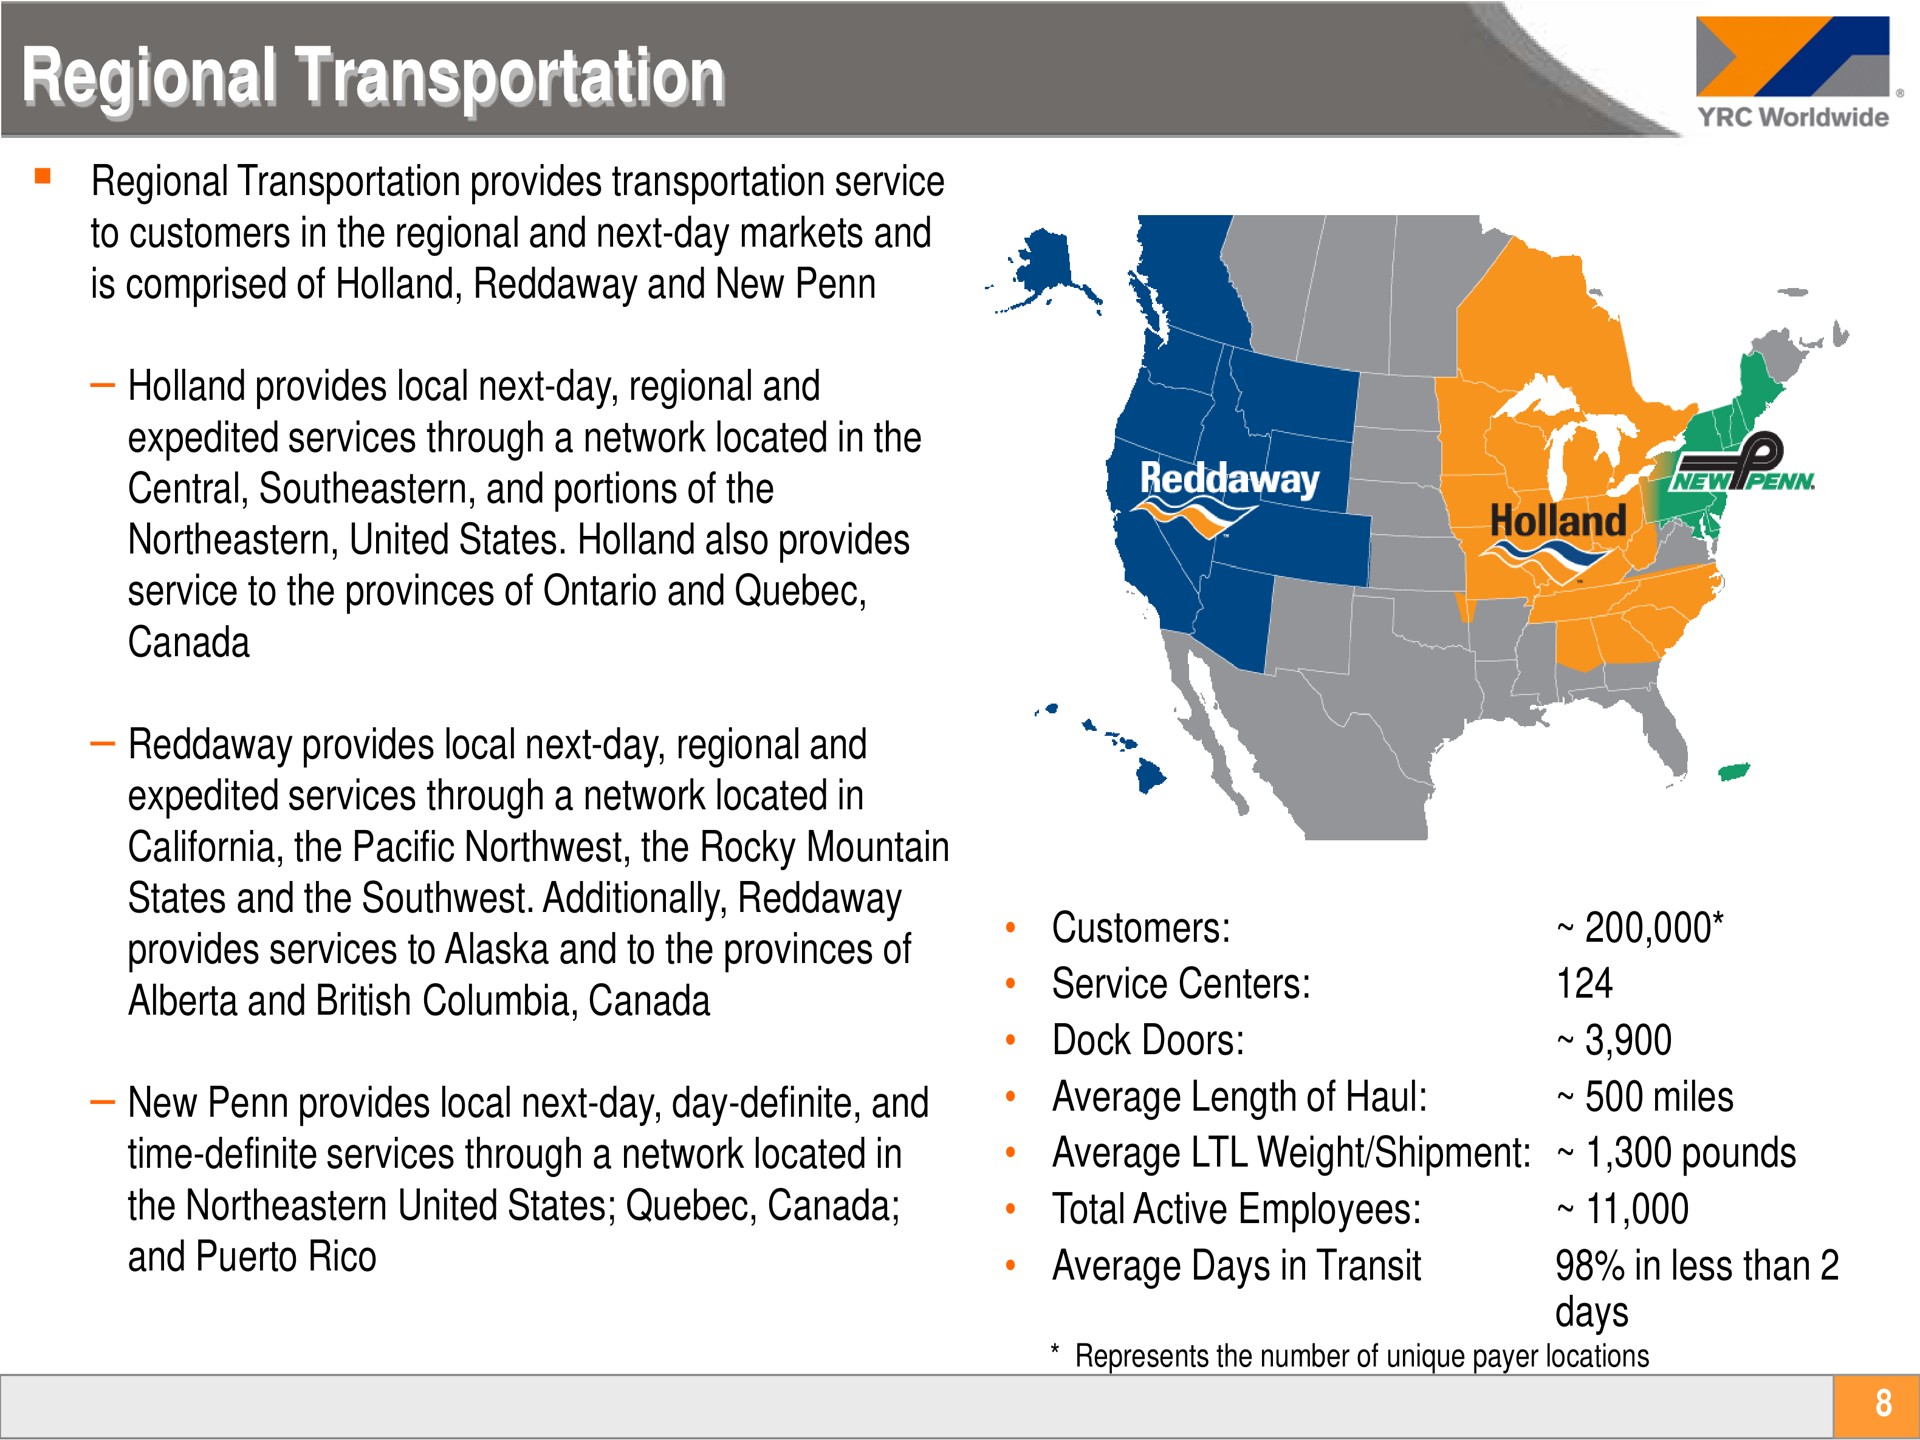 regional transportation provides services to and to the provinces of and canada new provides local next day day definite and and customers service centers average length of haul average days in transit miles in less than | Yellow Corporation